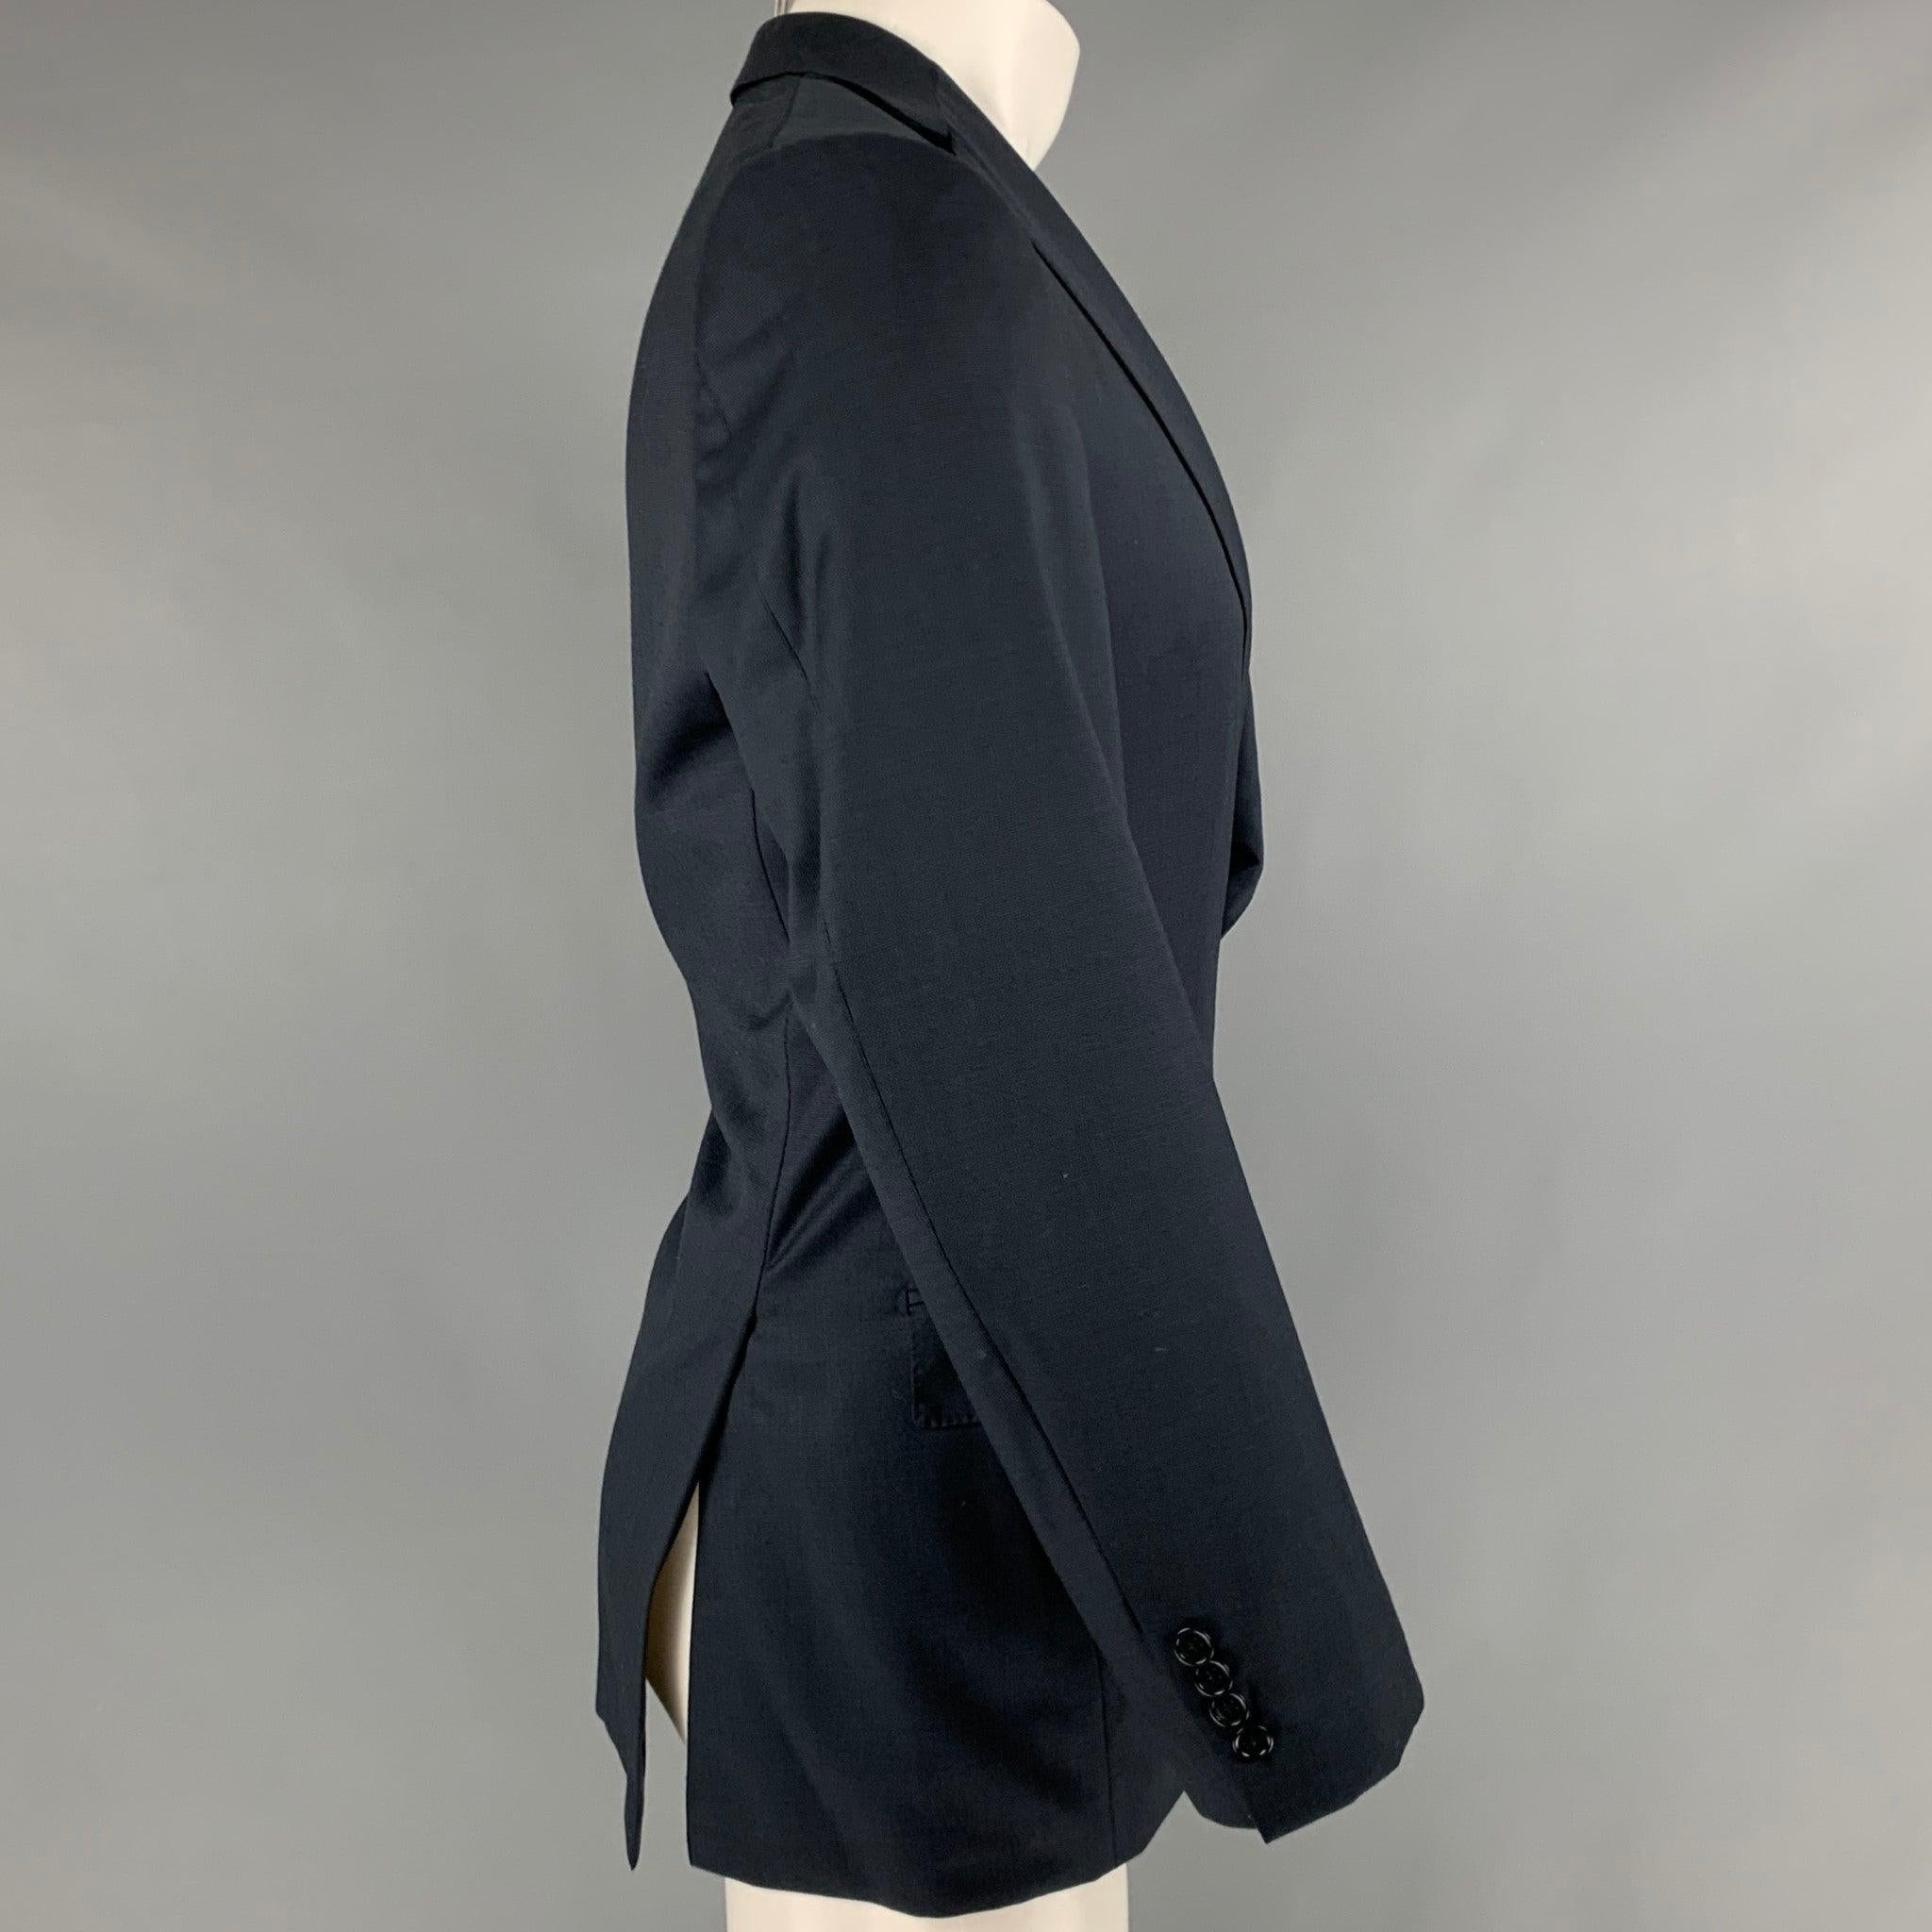 ERMENEGILDO ZEGNA sport coat
in a navy and black wool fabric featuring a nailhead pattern, notch lapel, double vented back, and double button closure. Very Good Pre-Owned Condition. Minor marks and signs of wear. 

Marked:   7-50R 

Measurements: 
